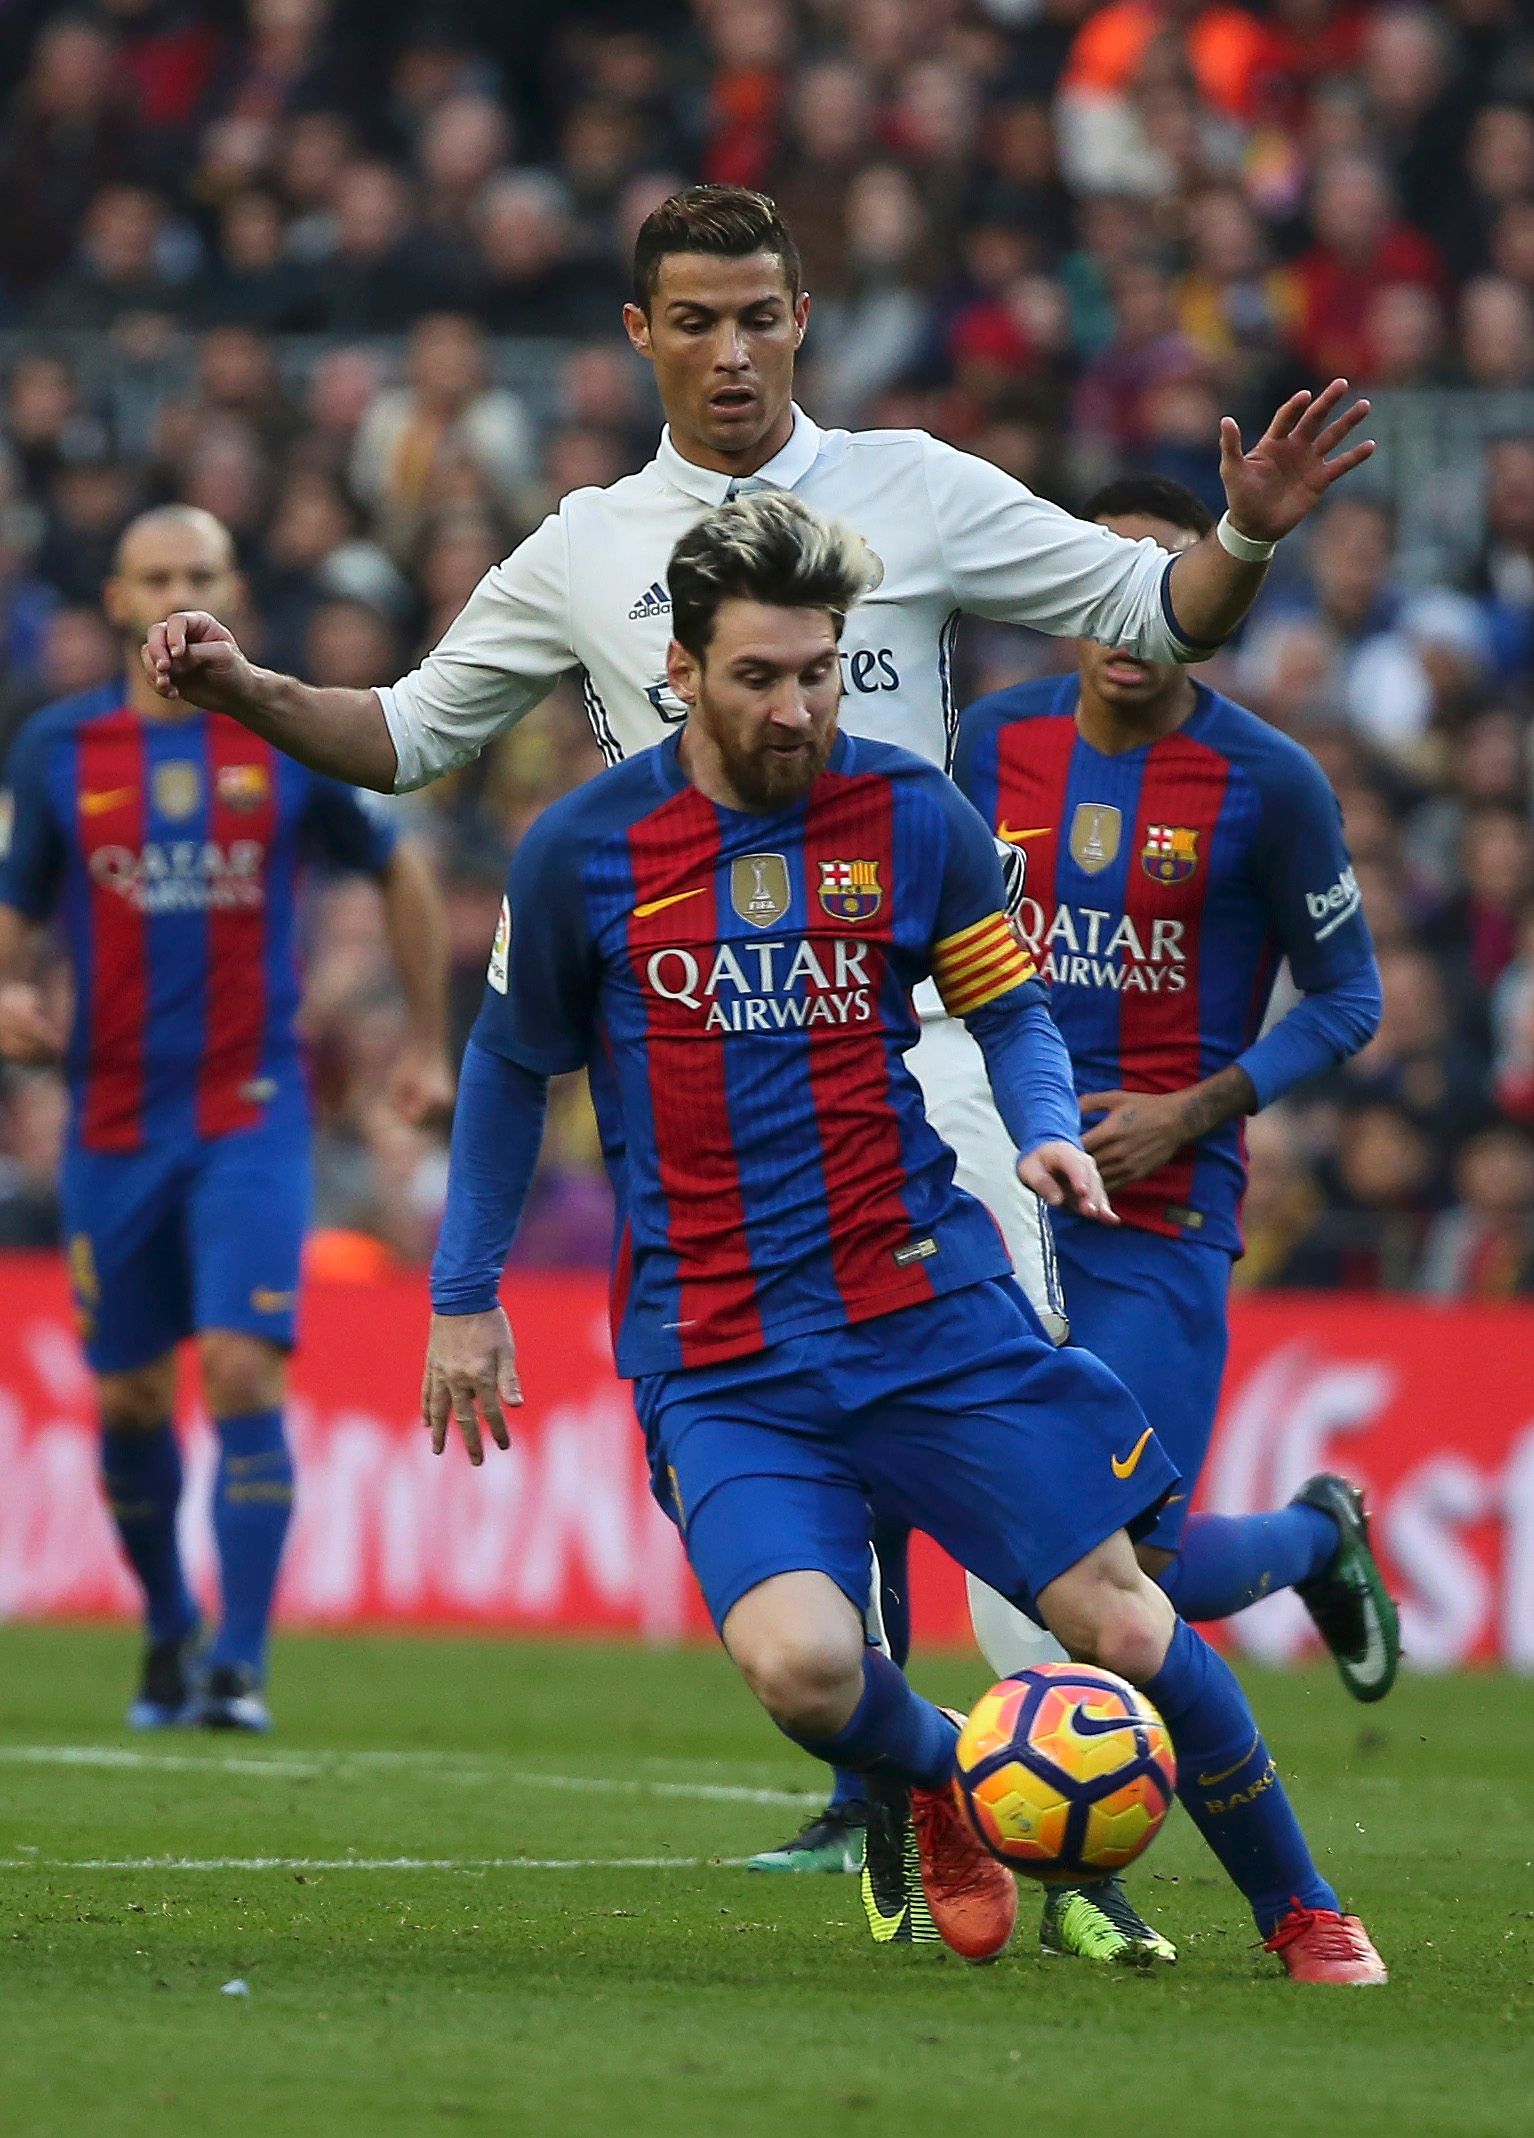 Ronaldo and Mess in action in El Clasico.